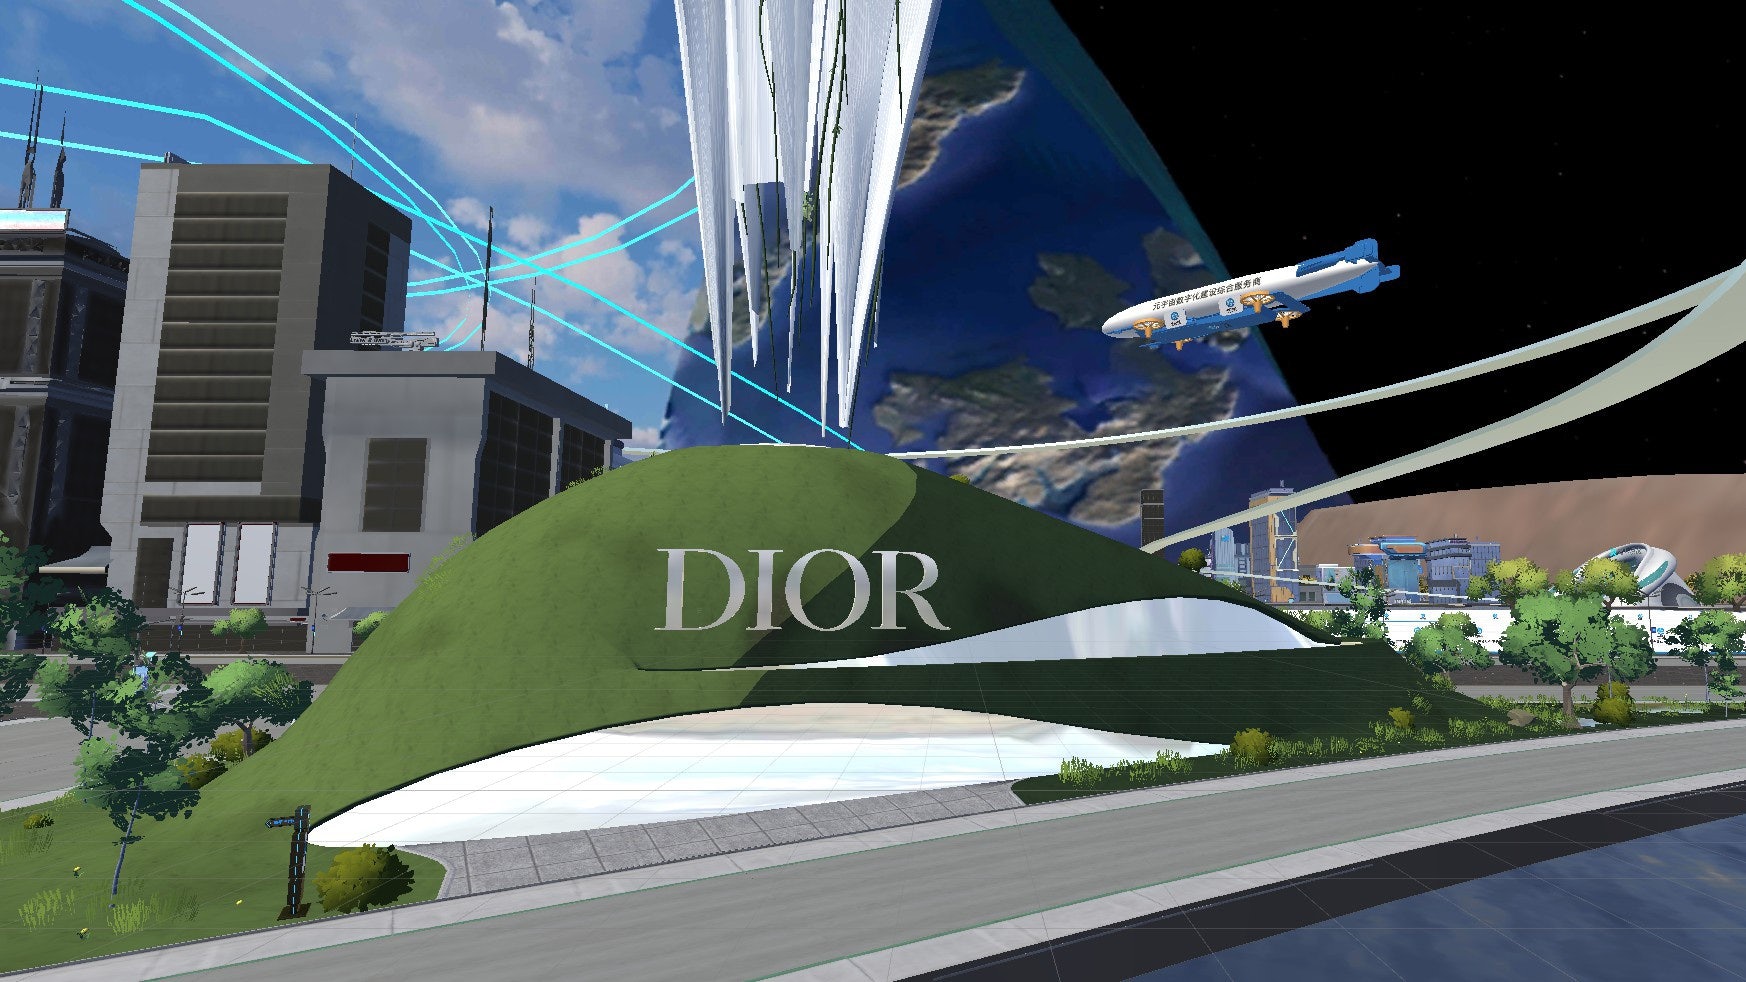 Dior is making waves again by streaming its Paris Fashion Week show within Baidu’s virtual space, following on from its digitized exhibition in April. Photo: Via Zaker